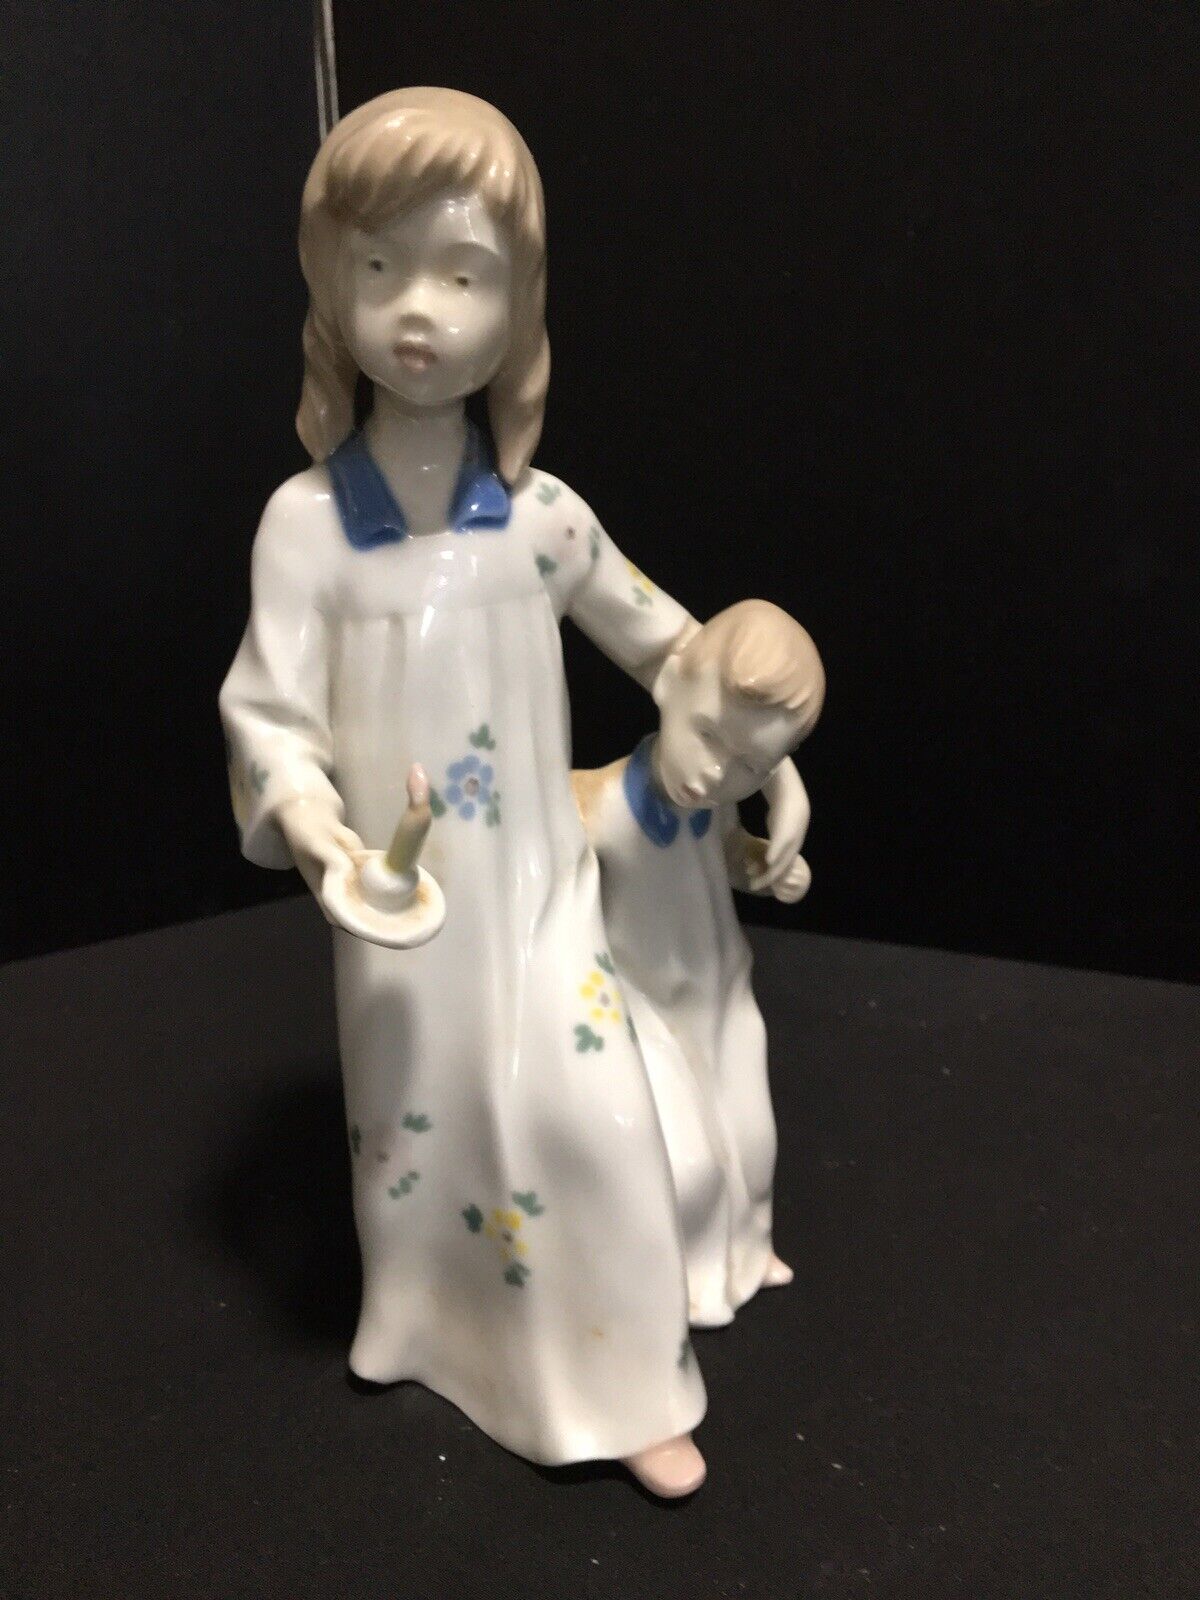 BEAUTIFUL VINTAGE PORCELAIN SAXE FIGURINE- MOTHER AND CHILD AT NIGHTIME